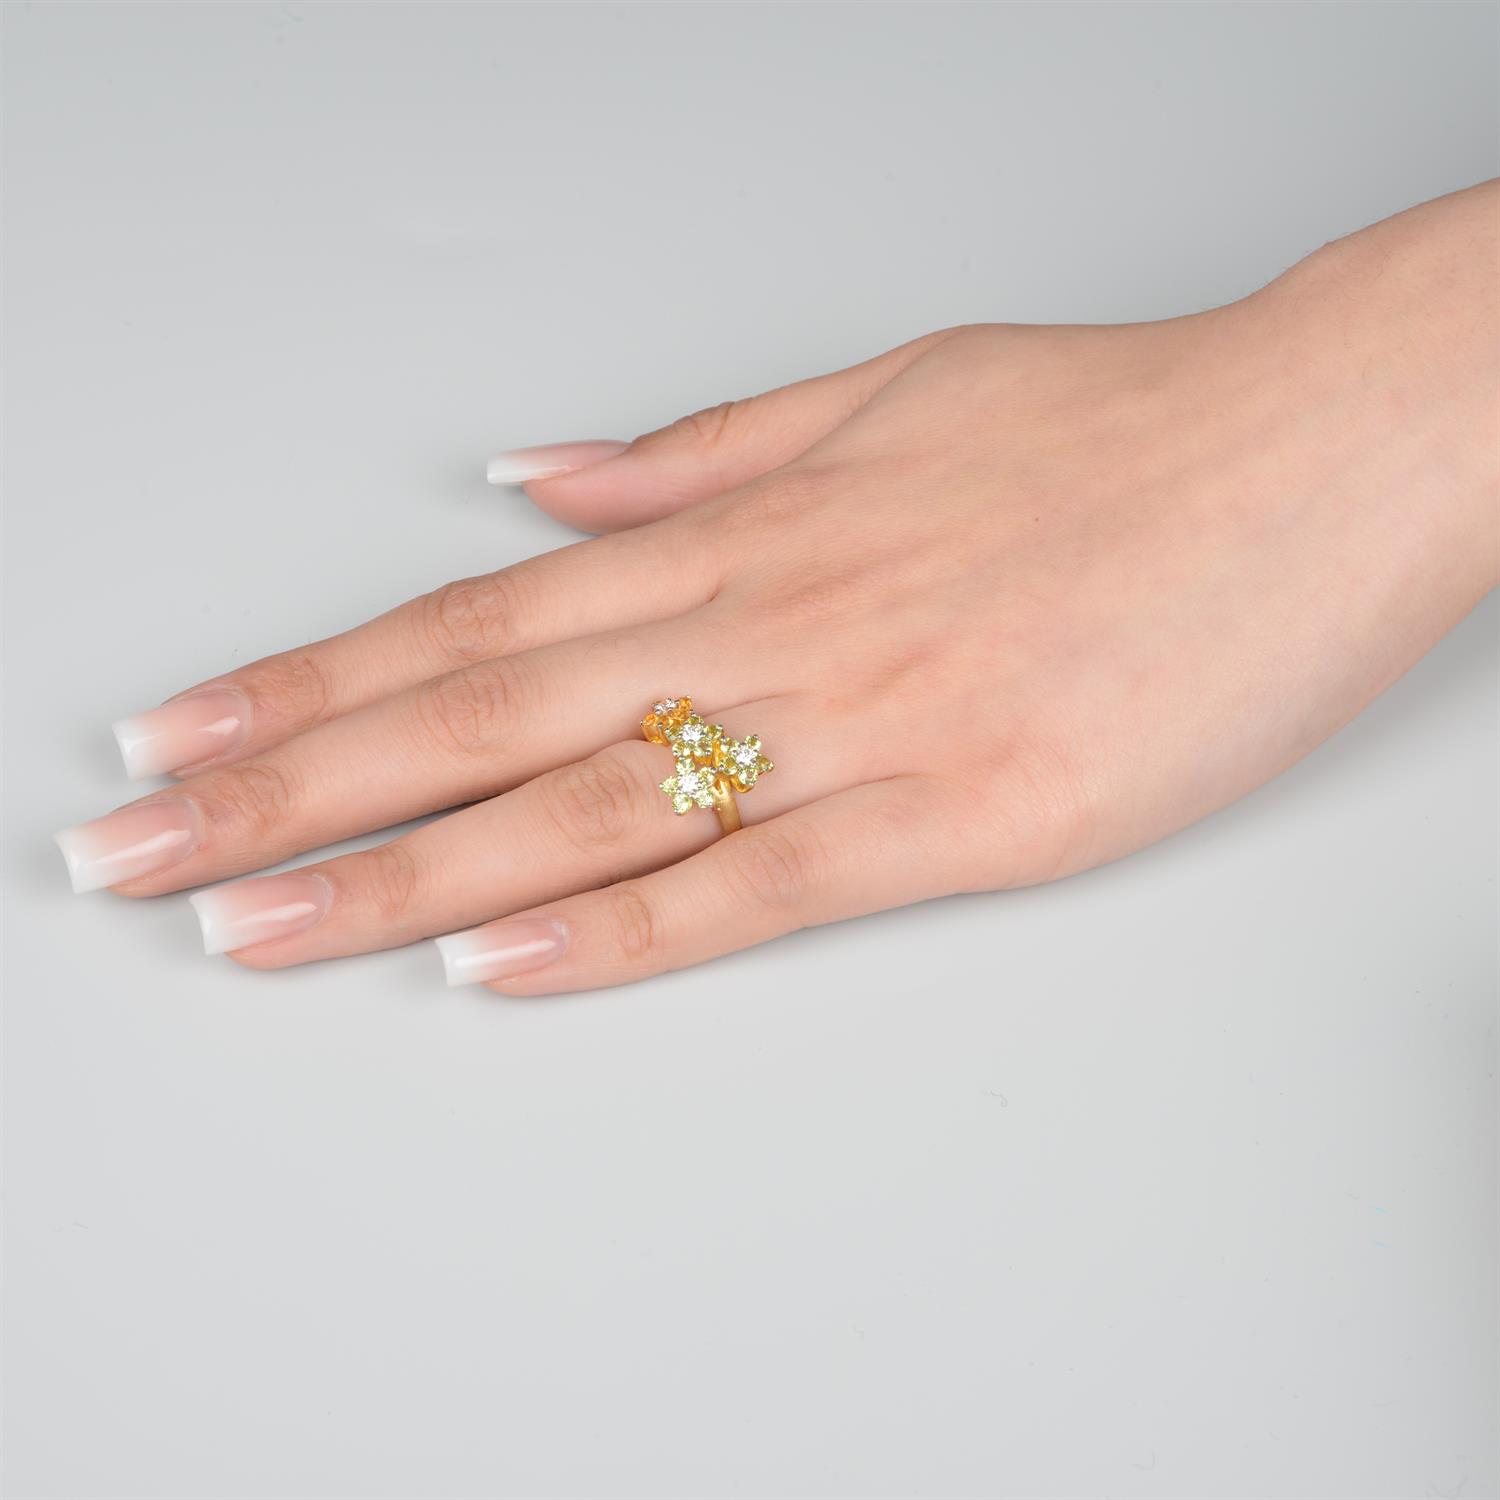 Diamond, peridot and citrine floral ring - Image 5 of 5